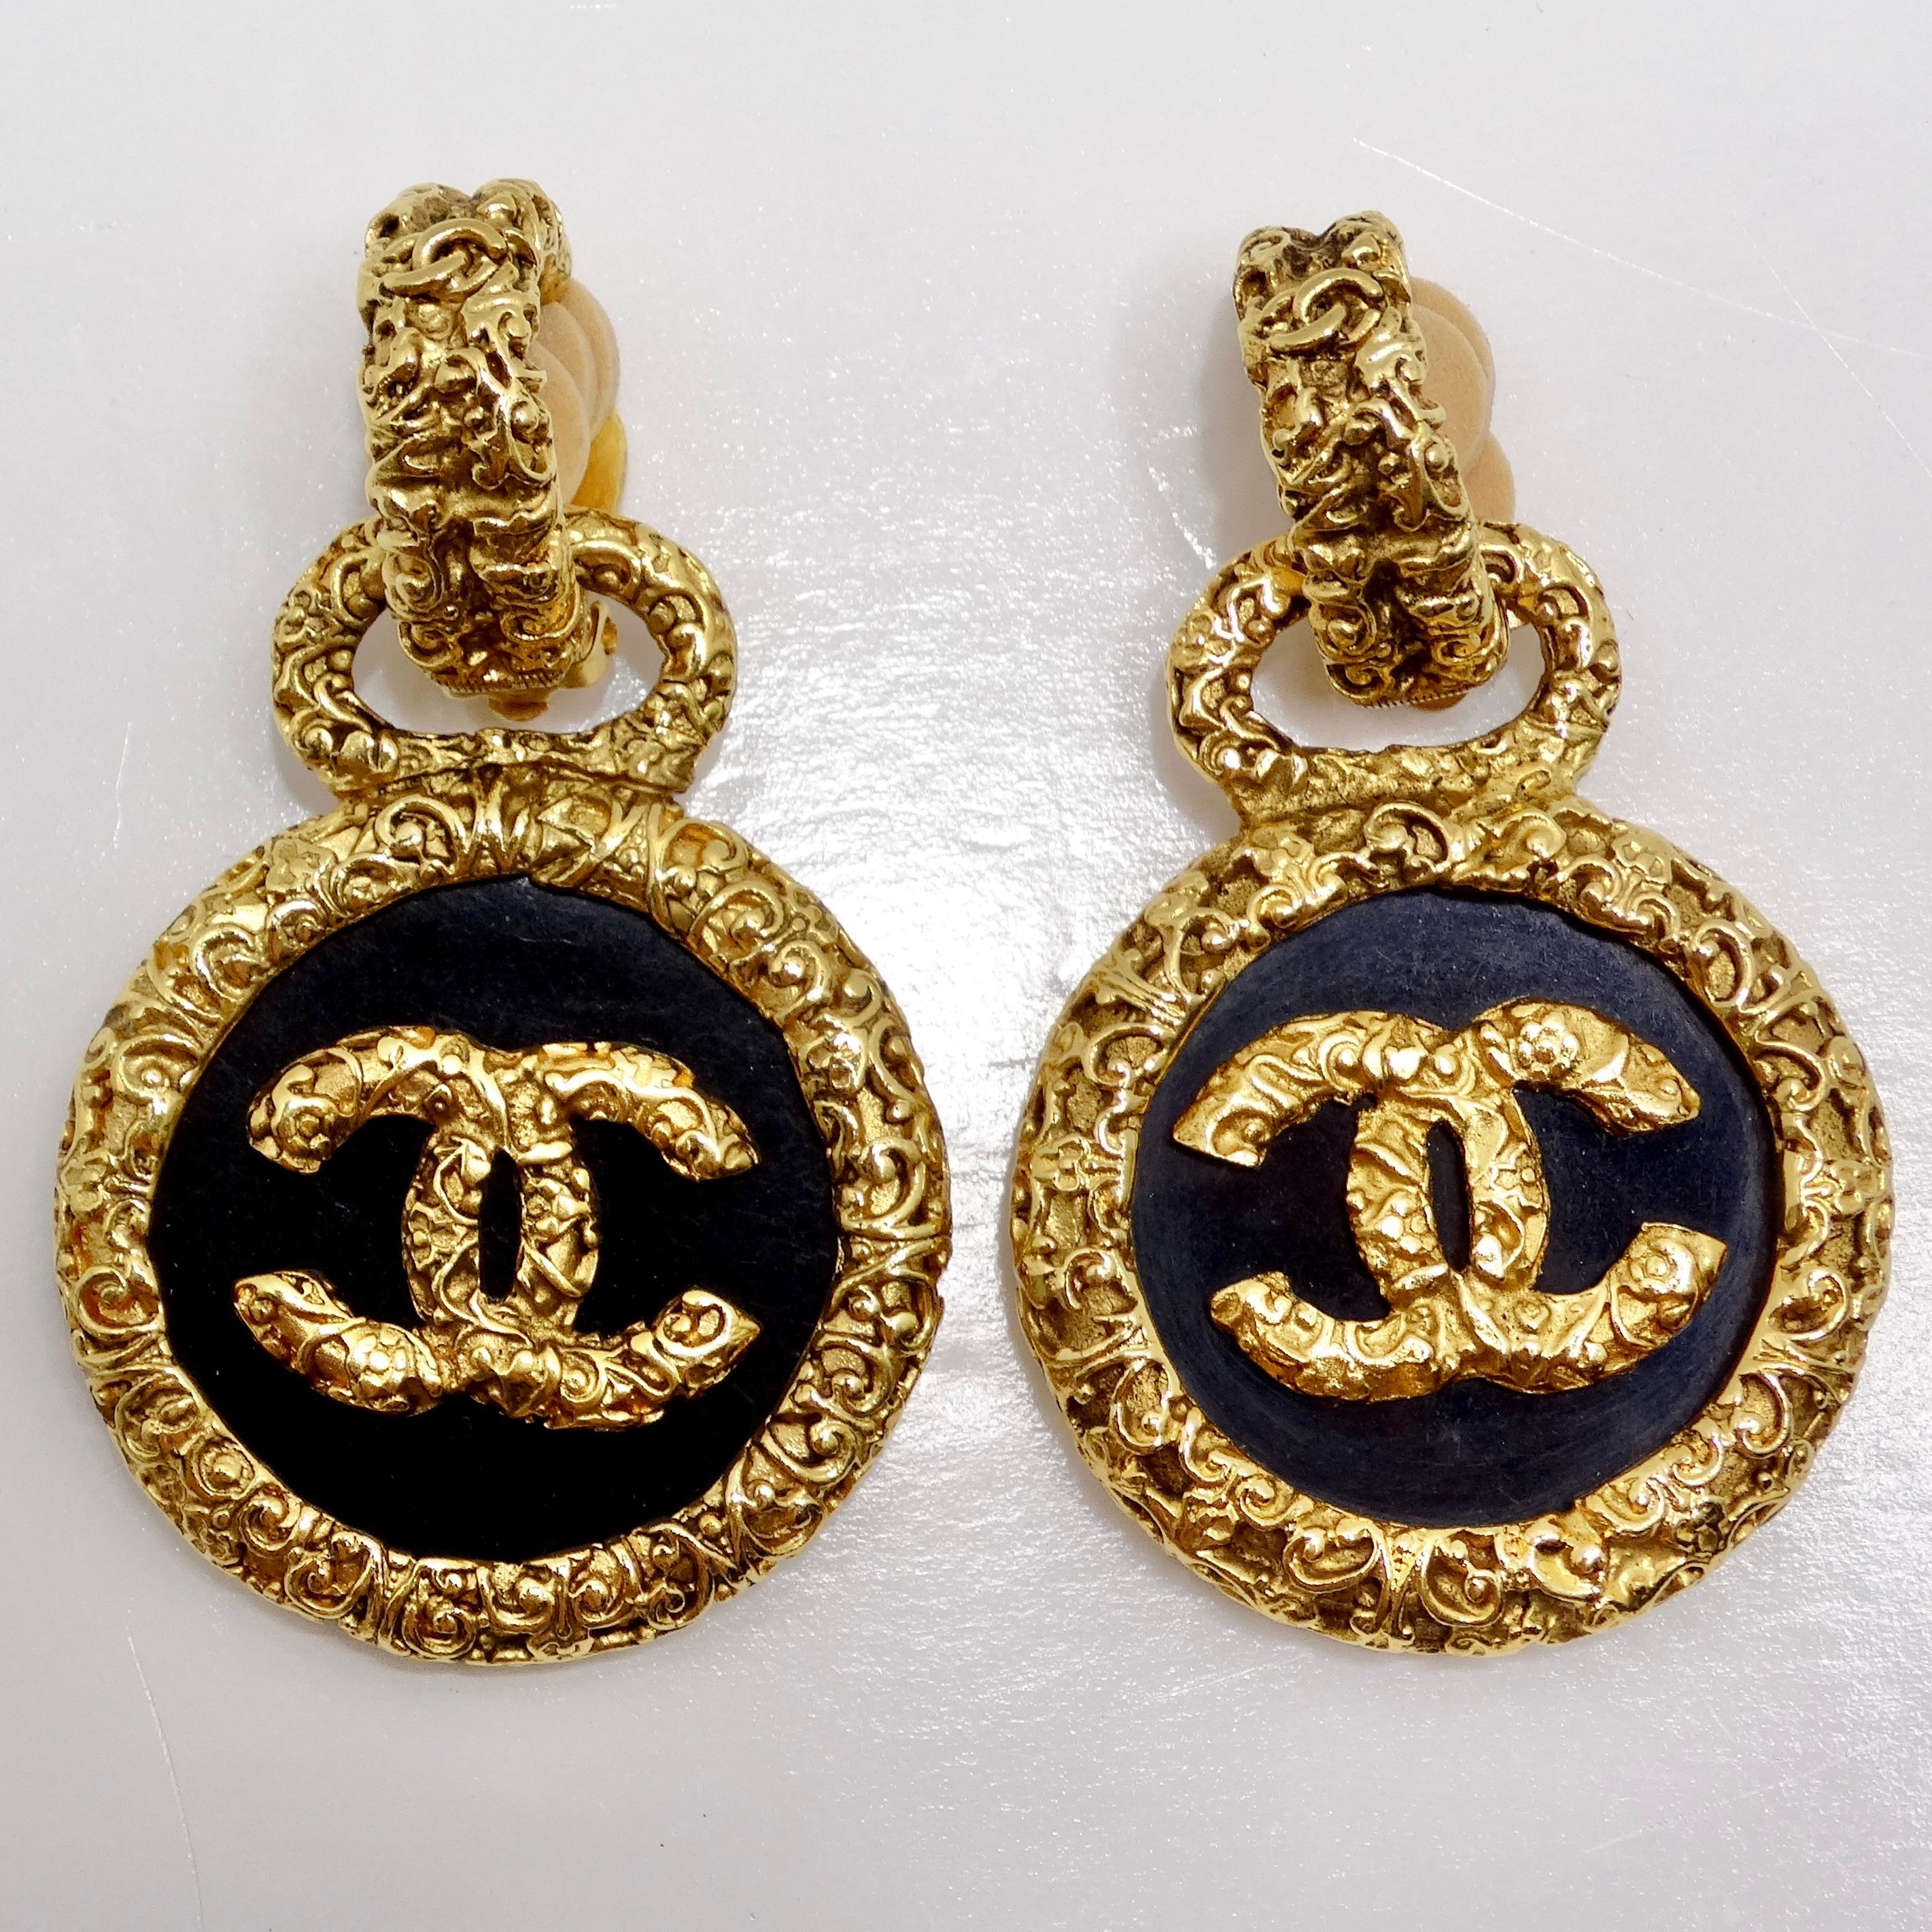 Introducing the exquisite Chanel 1993 Gold Tone Black CC Medallion Florentine Earrings, a stunning pair that exudes timeless elegance and sophistication. Crafted with meticulous attention to detail, these earrings are sure to elevate any ensemble